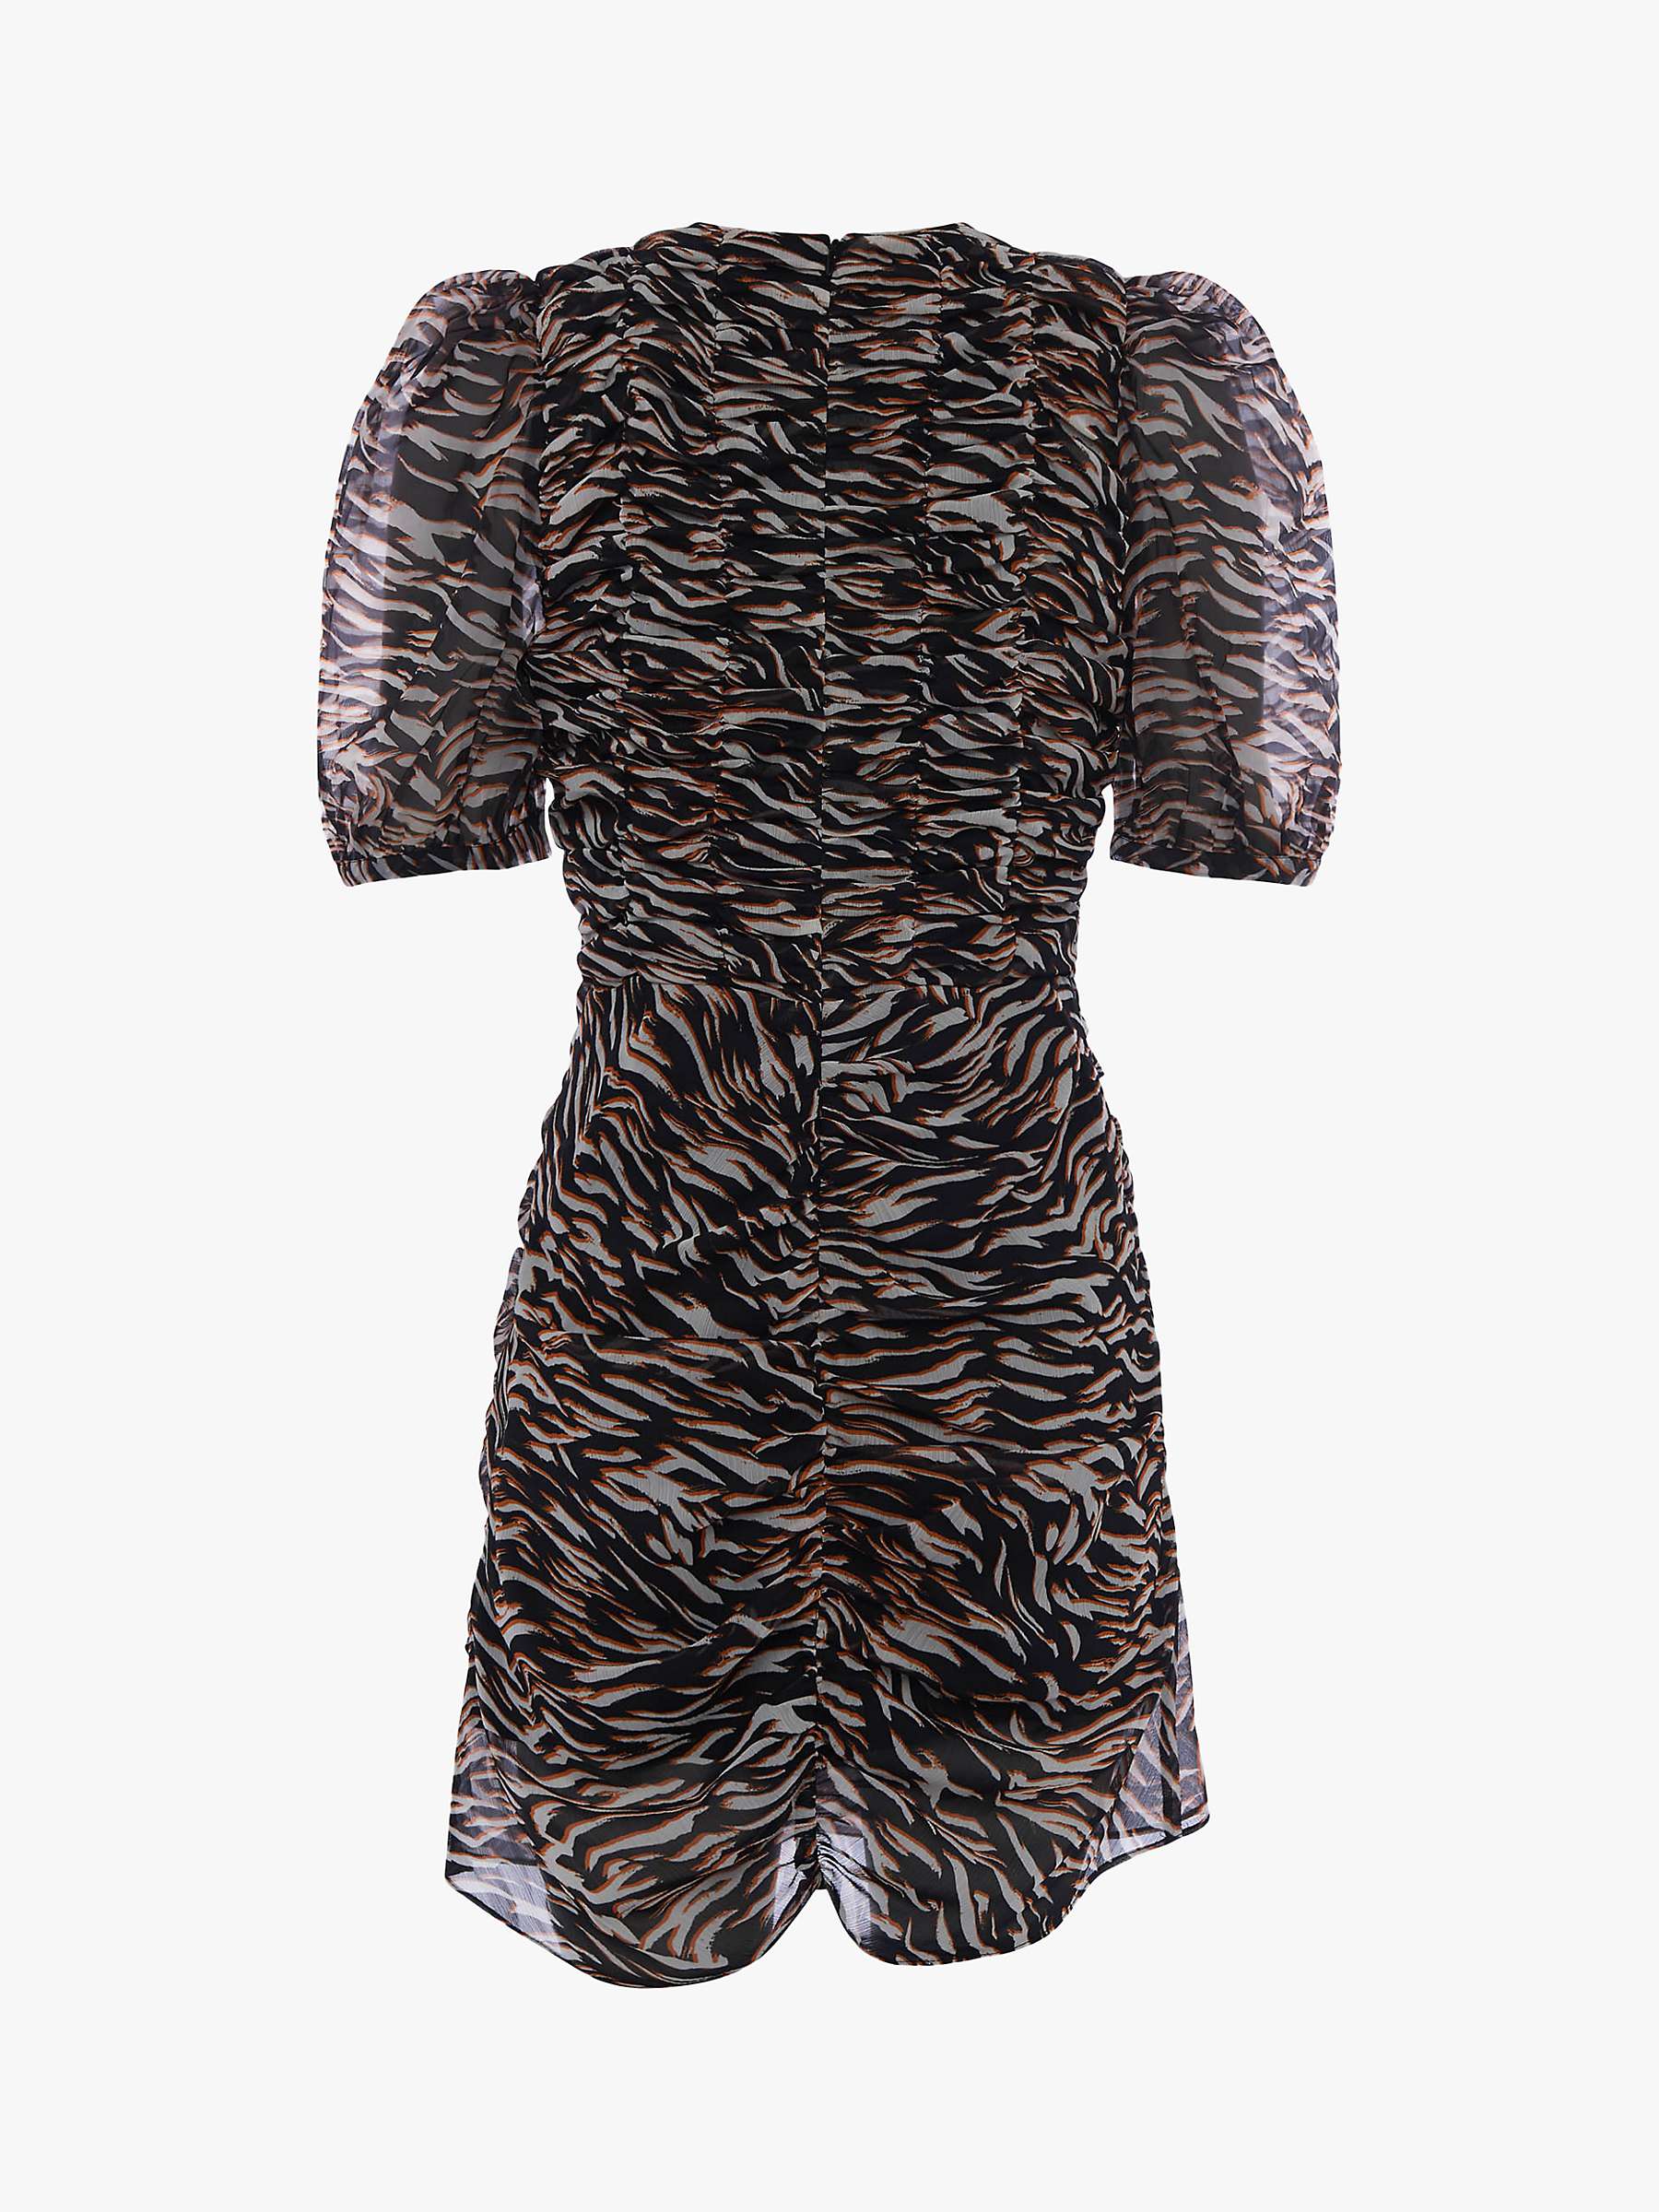 Buy French Connection Tiger Crinkle Mix Mini Dress, Black/Multi Online at johnlewis.com